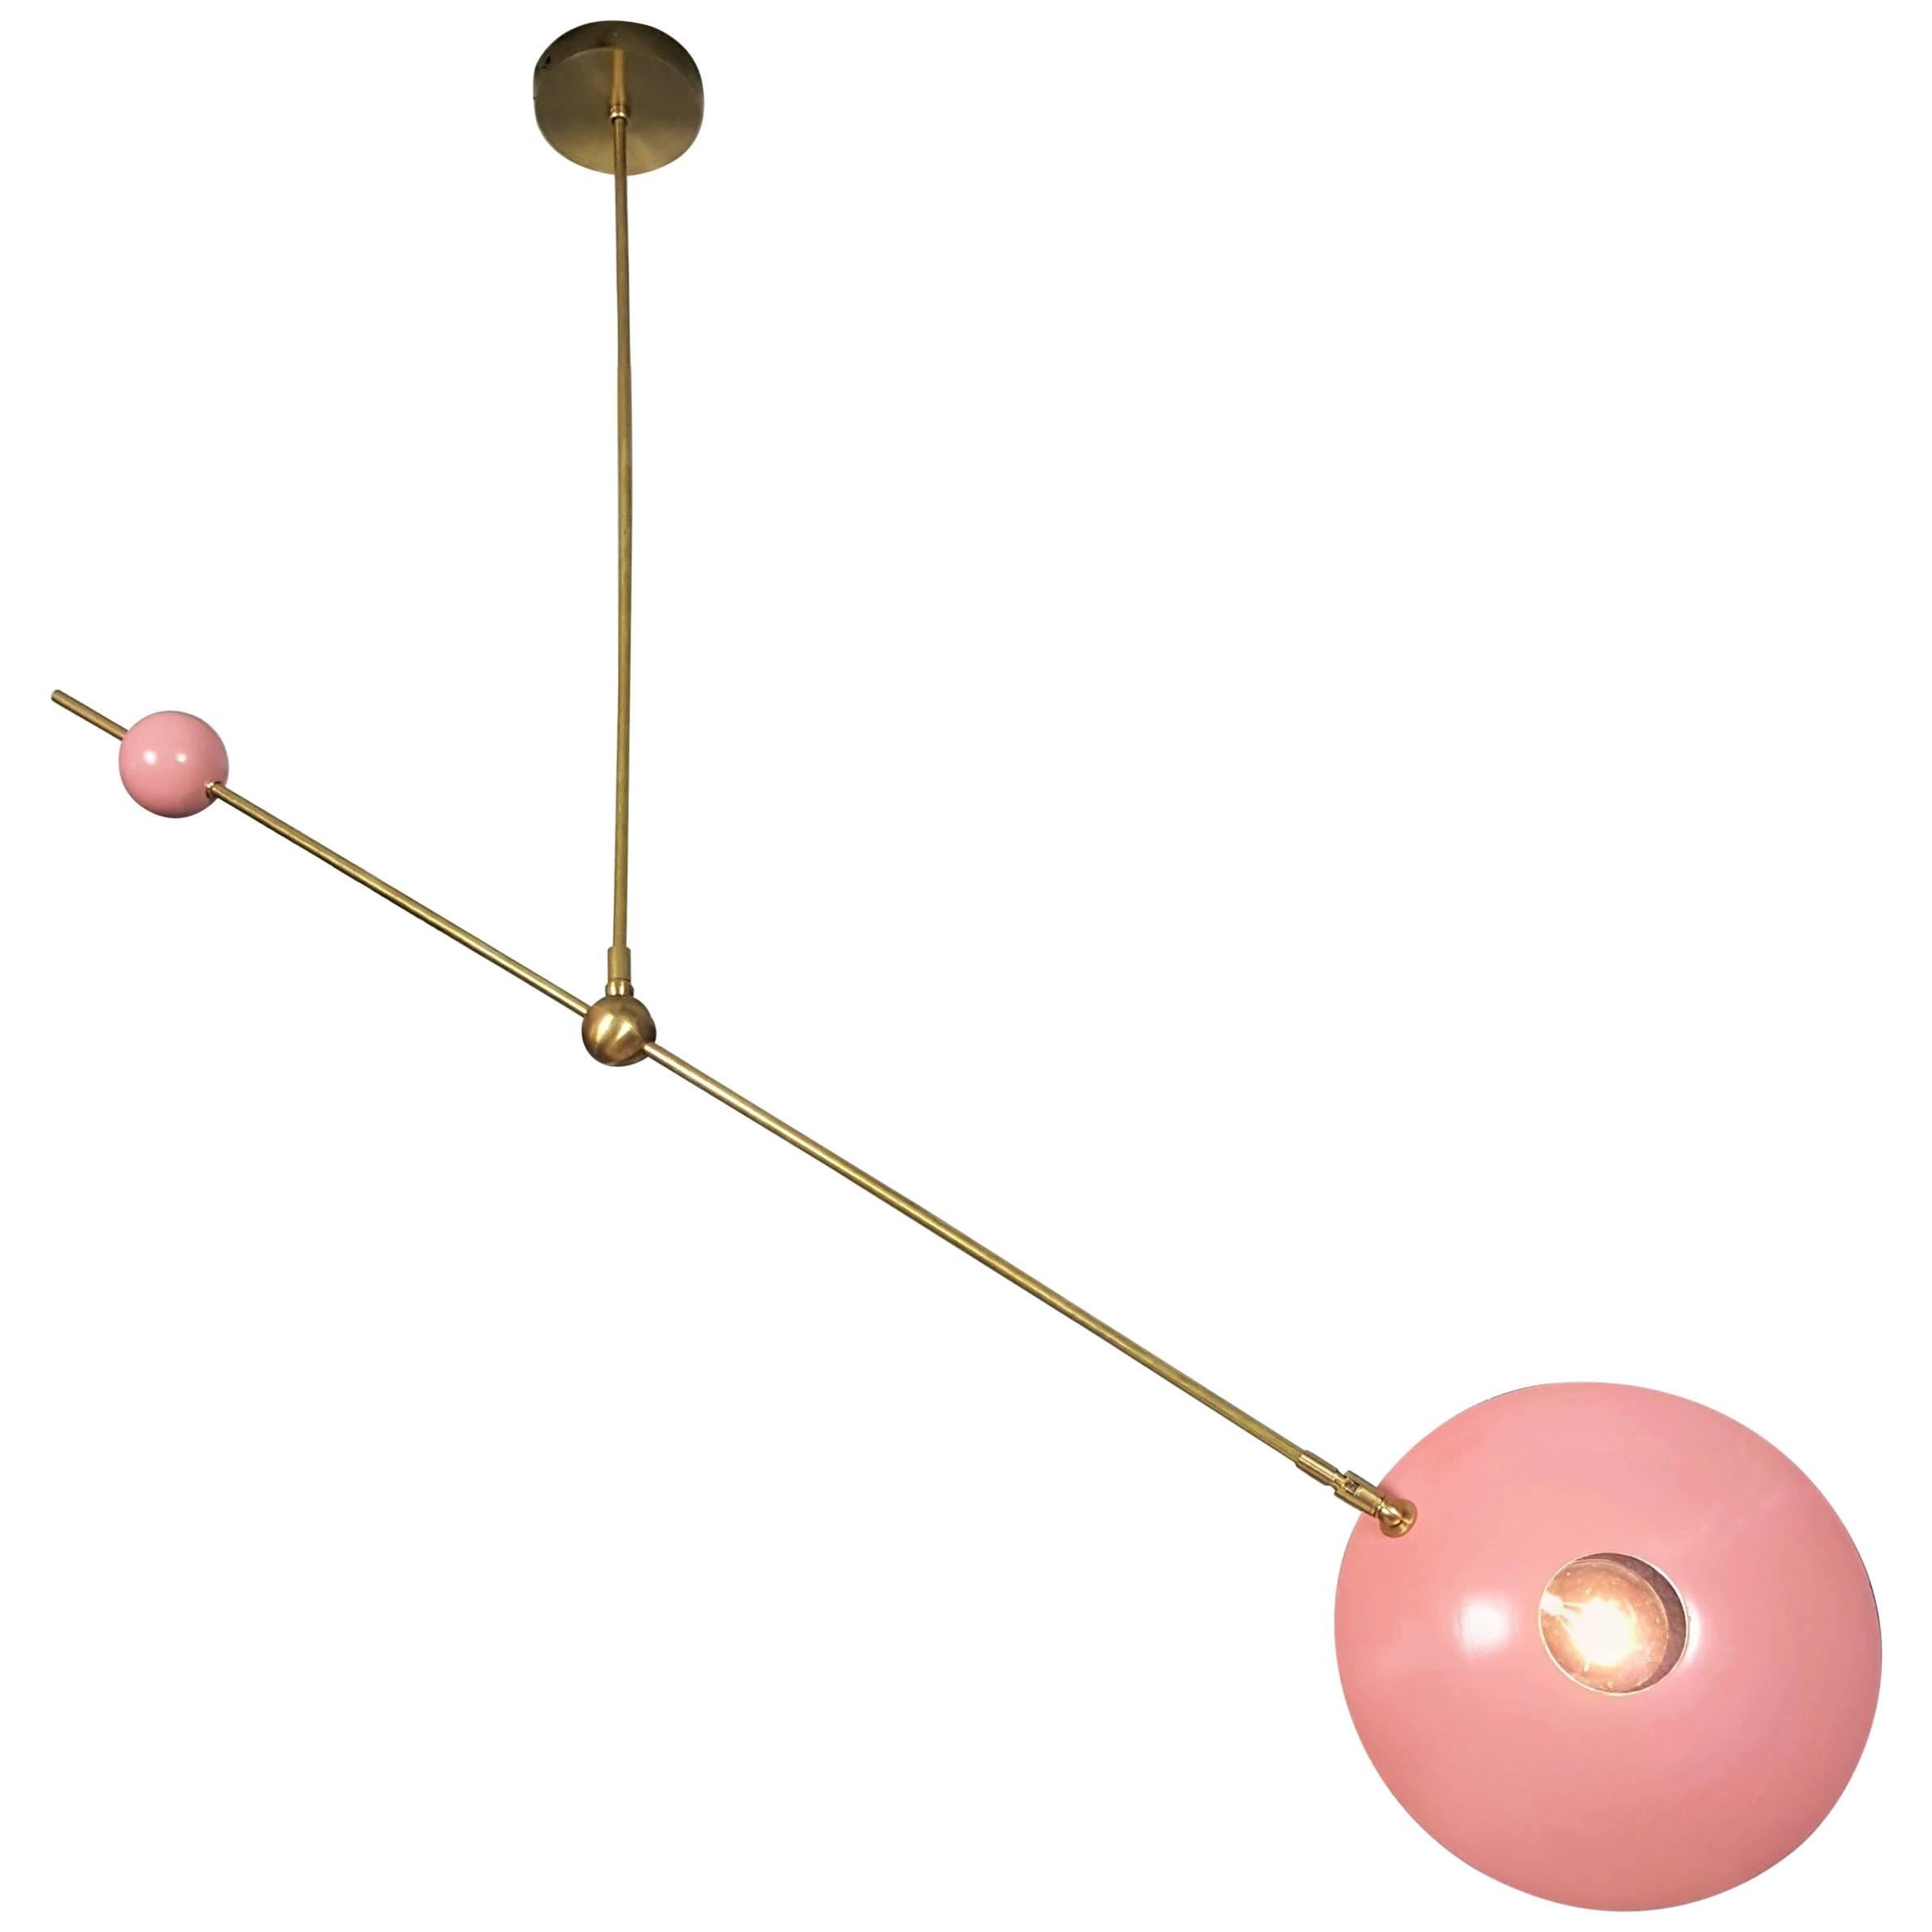 Striking "Counterpoint" Brass and Enamel Pendant by Blueprint Lighting, 2017